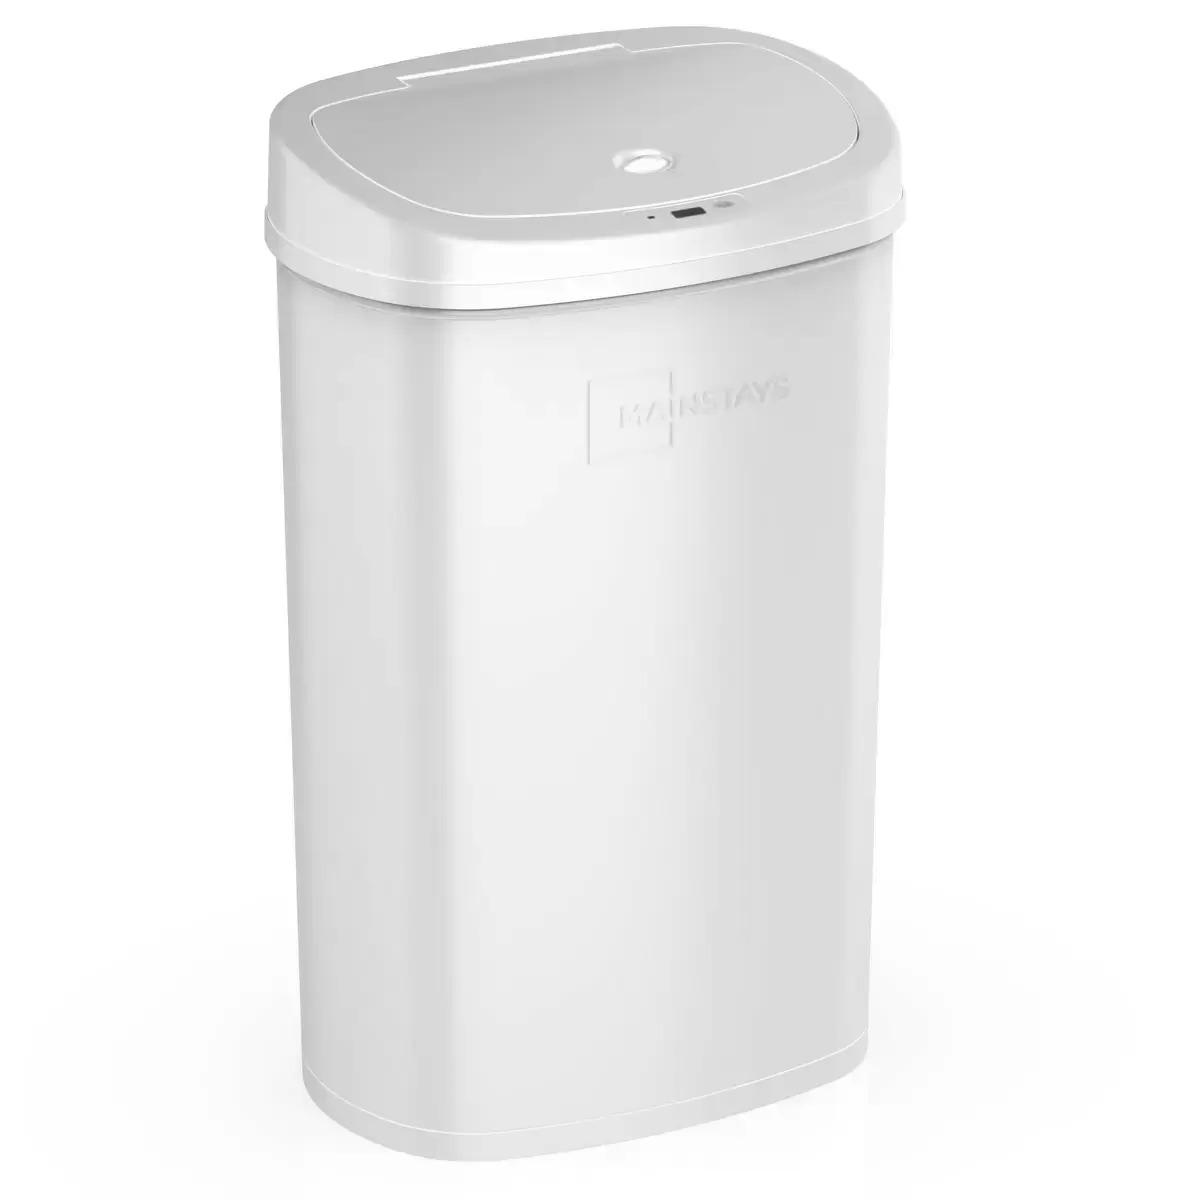 Mainstays Motion Sensor Stainless Steel Trash Can for $34.98 Shipped